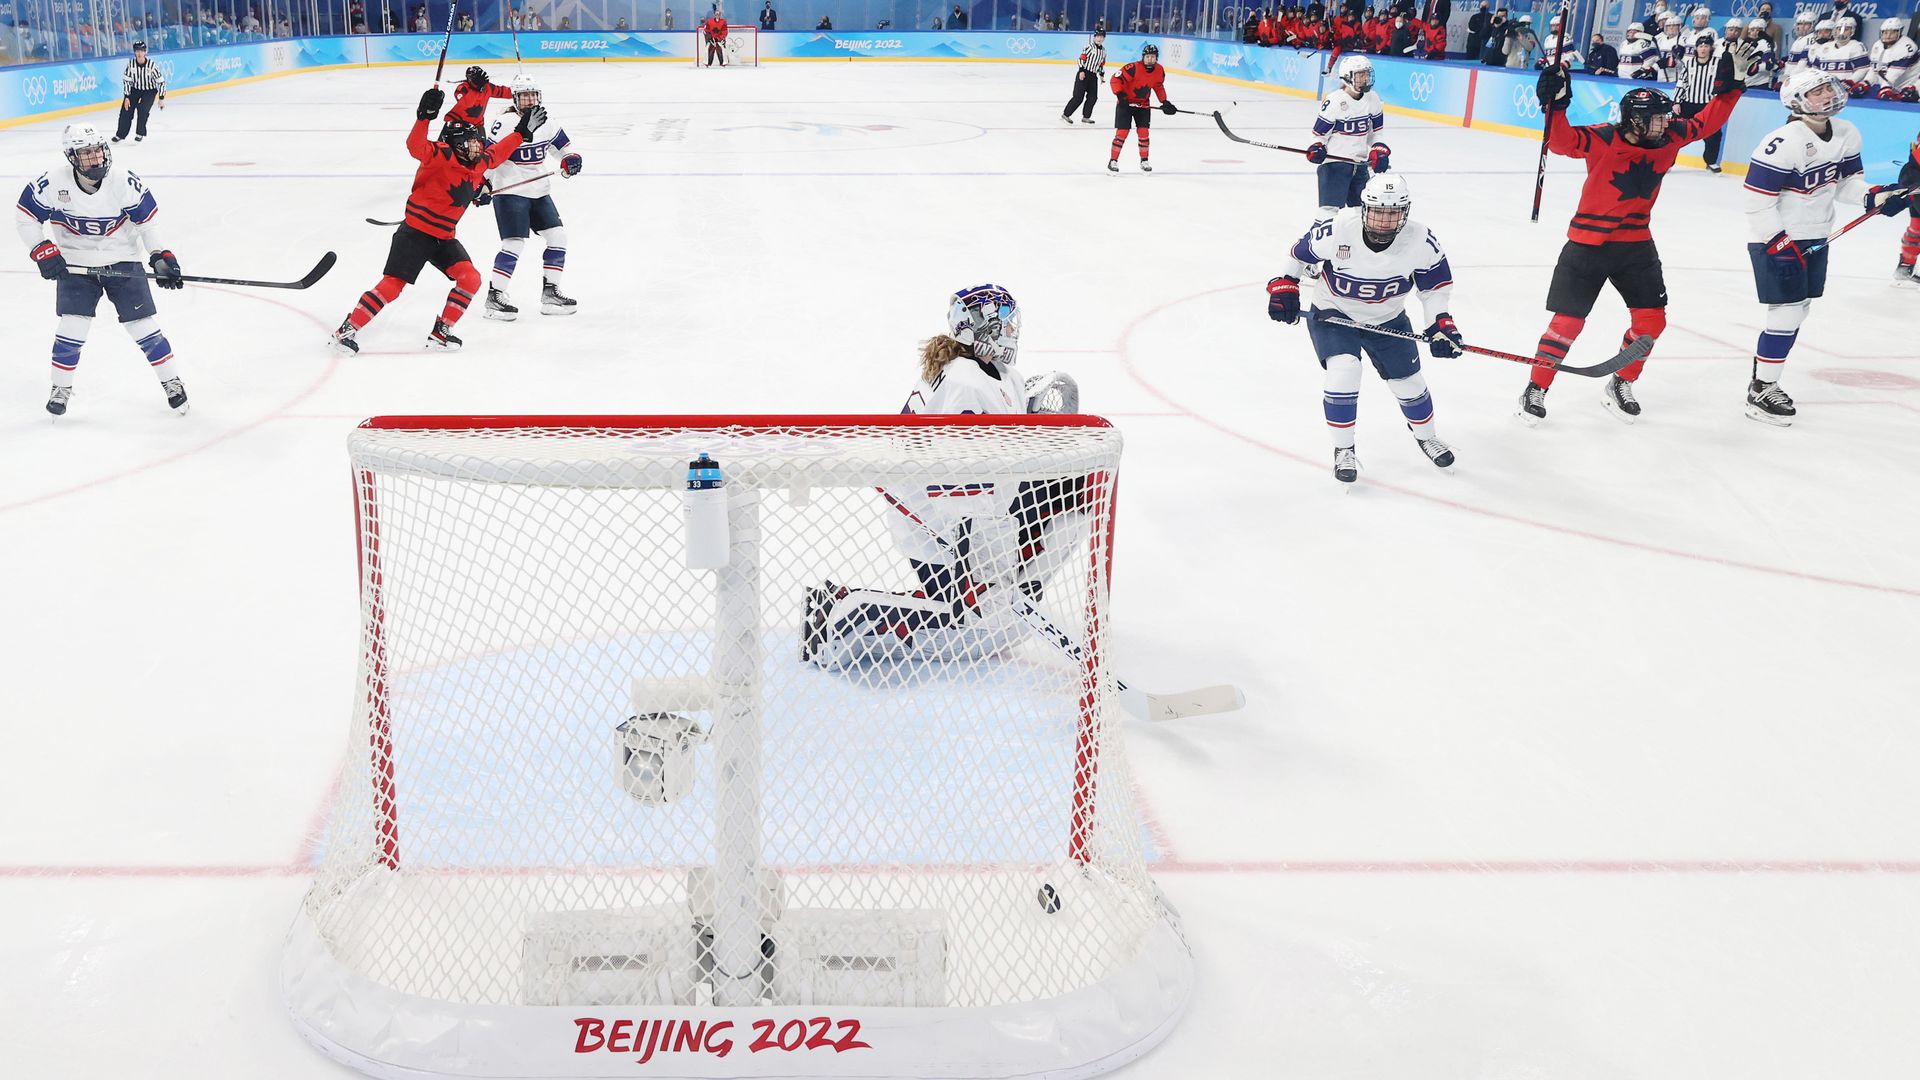 U.S. goaltender Alex Cavallini #33 looks on after Canada scored in the first period during the Women's Olympic Ice Hockey Gold Medal match Thursday.